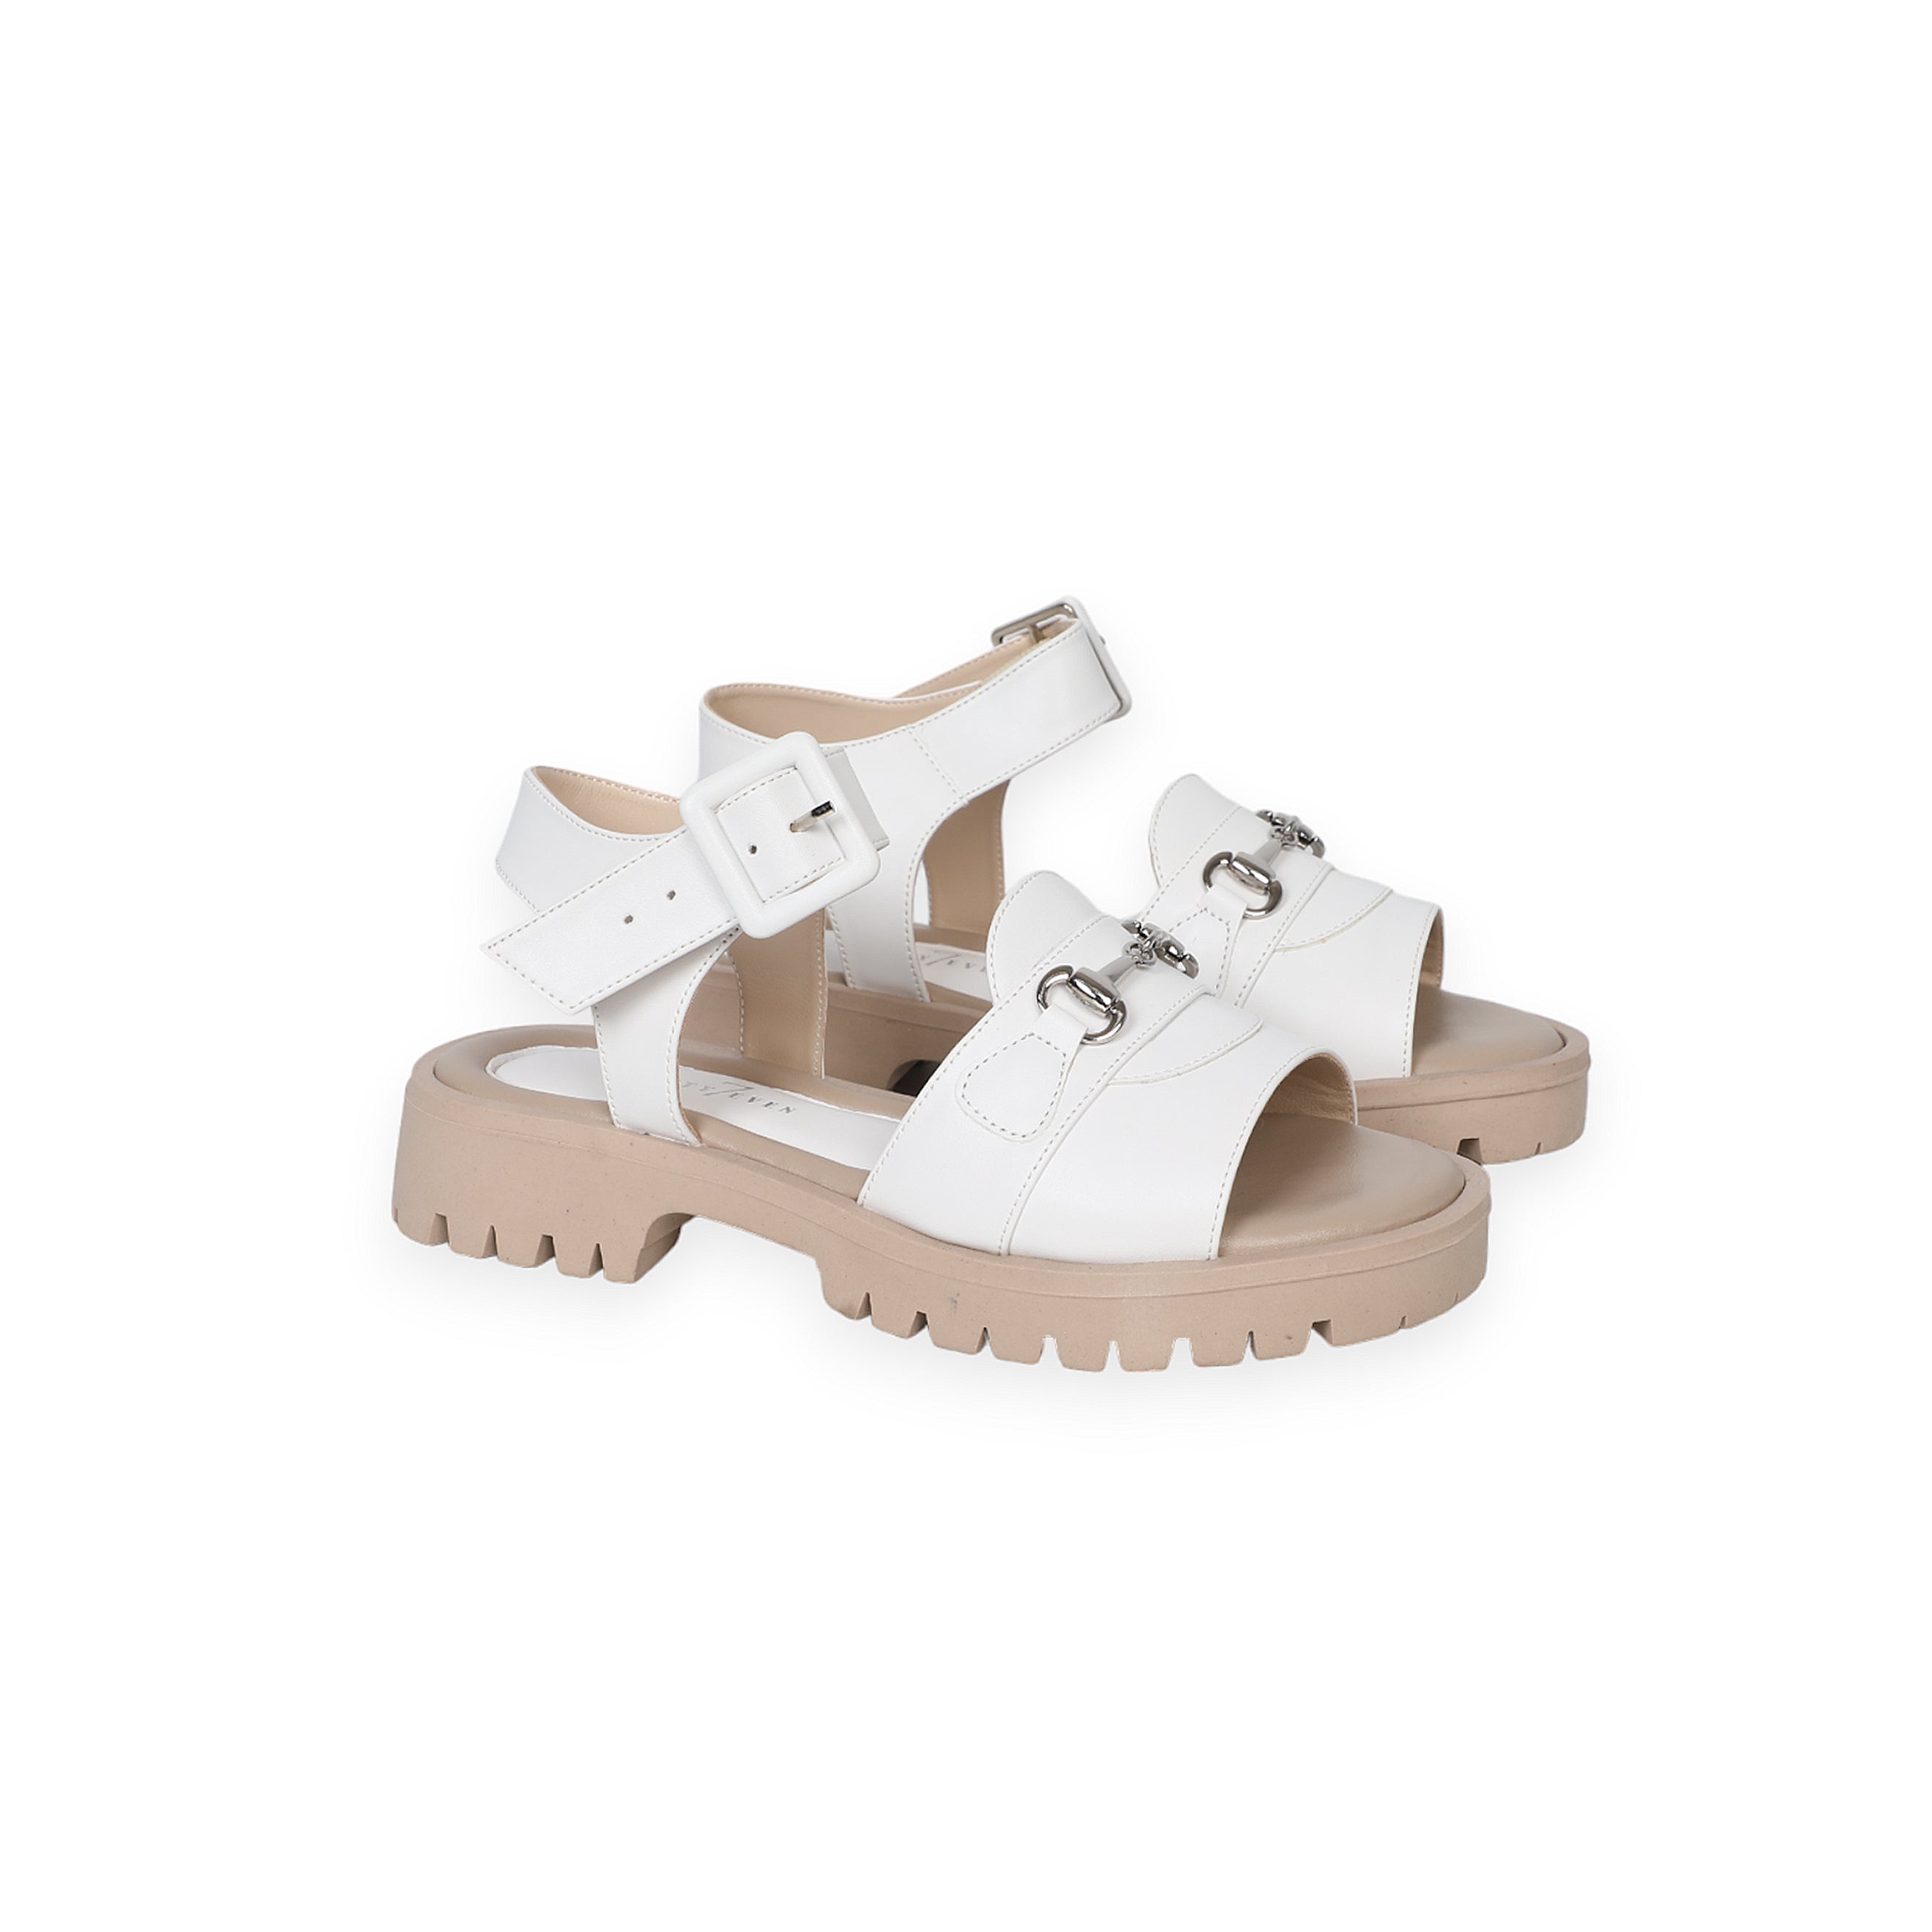 White Women Sandals With Sole Ankle Strap